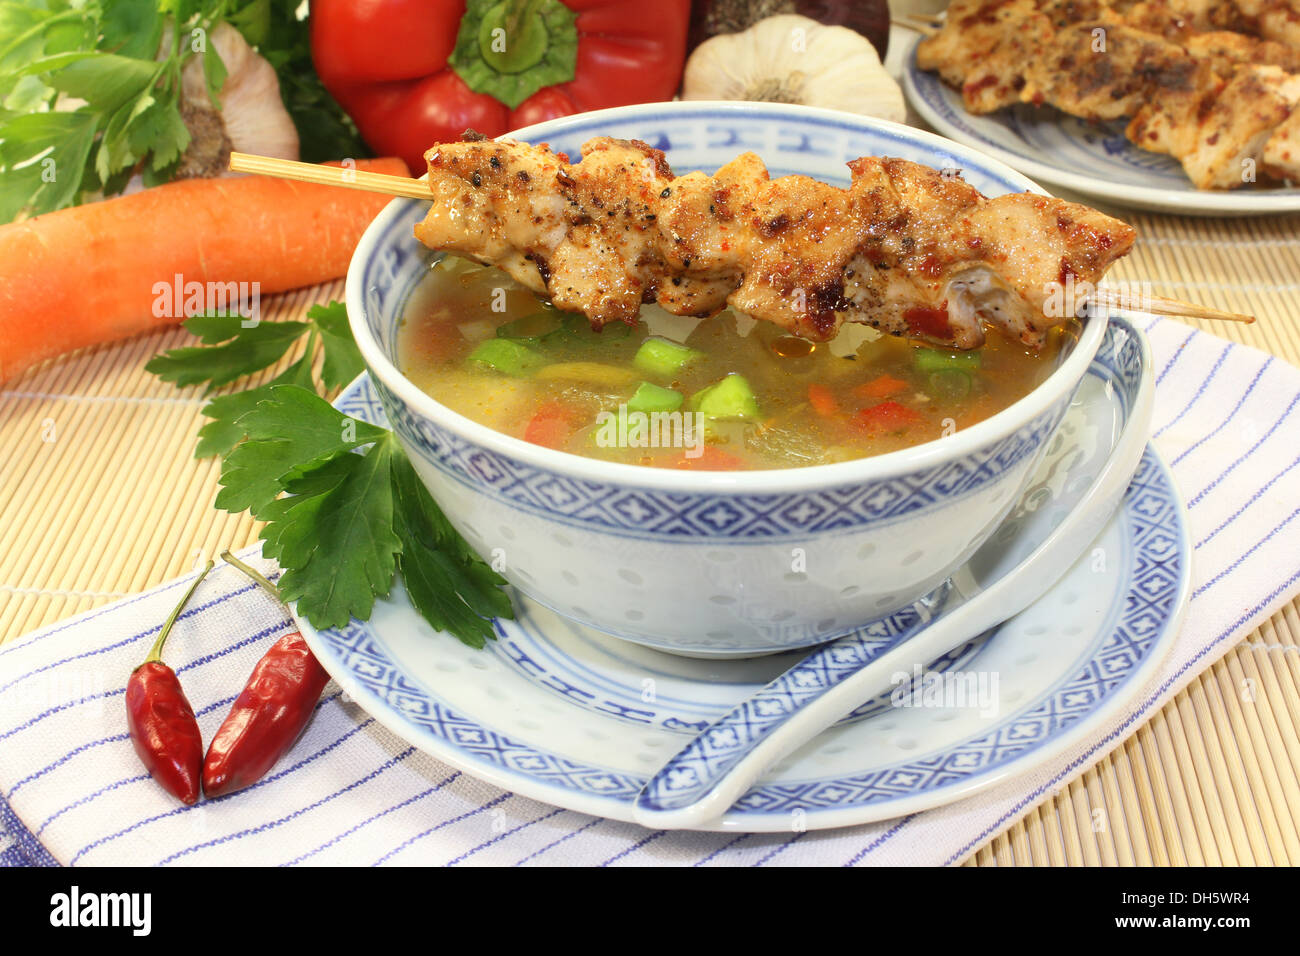 a bowl of chicken consomme and a chicken skewer Stock Photo